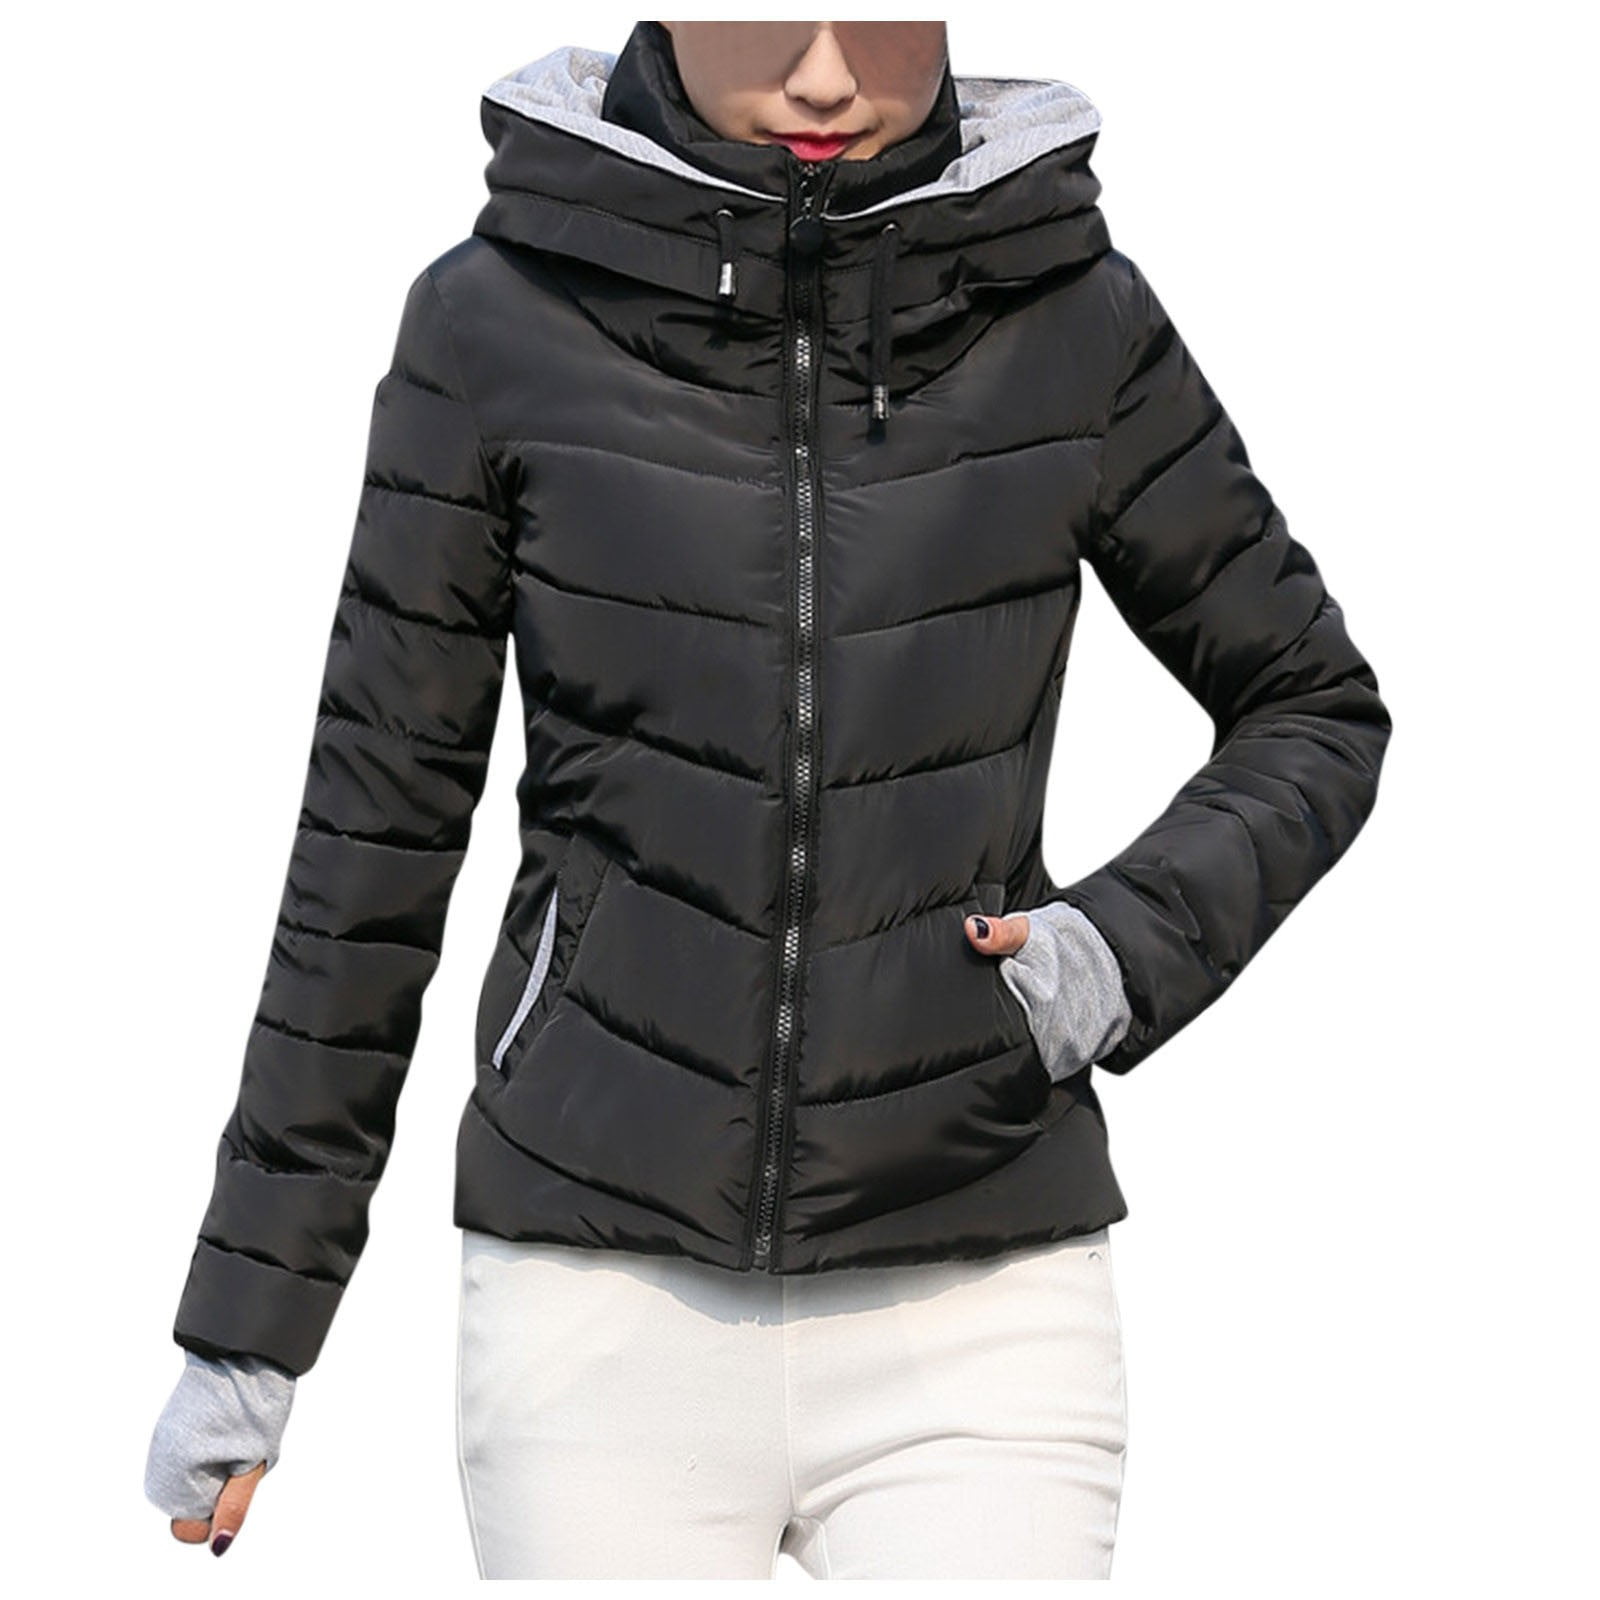 Winter Coats for Women Therm Down Coat Women Outerwear Hooded Coat Short Slim Cotton-padded Jackets Coats Grueso CáLido Para Mujer -